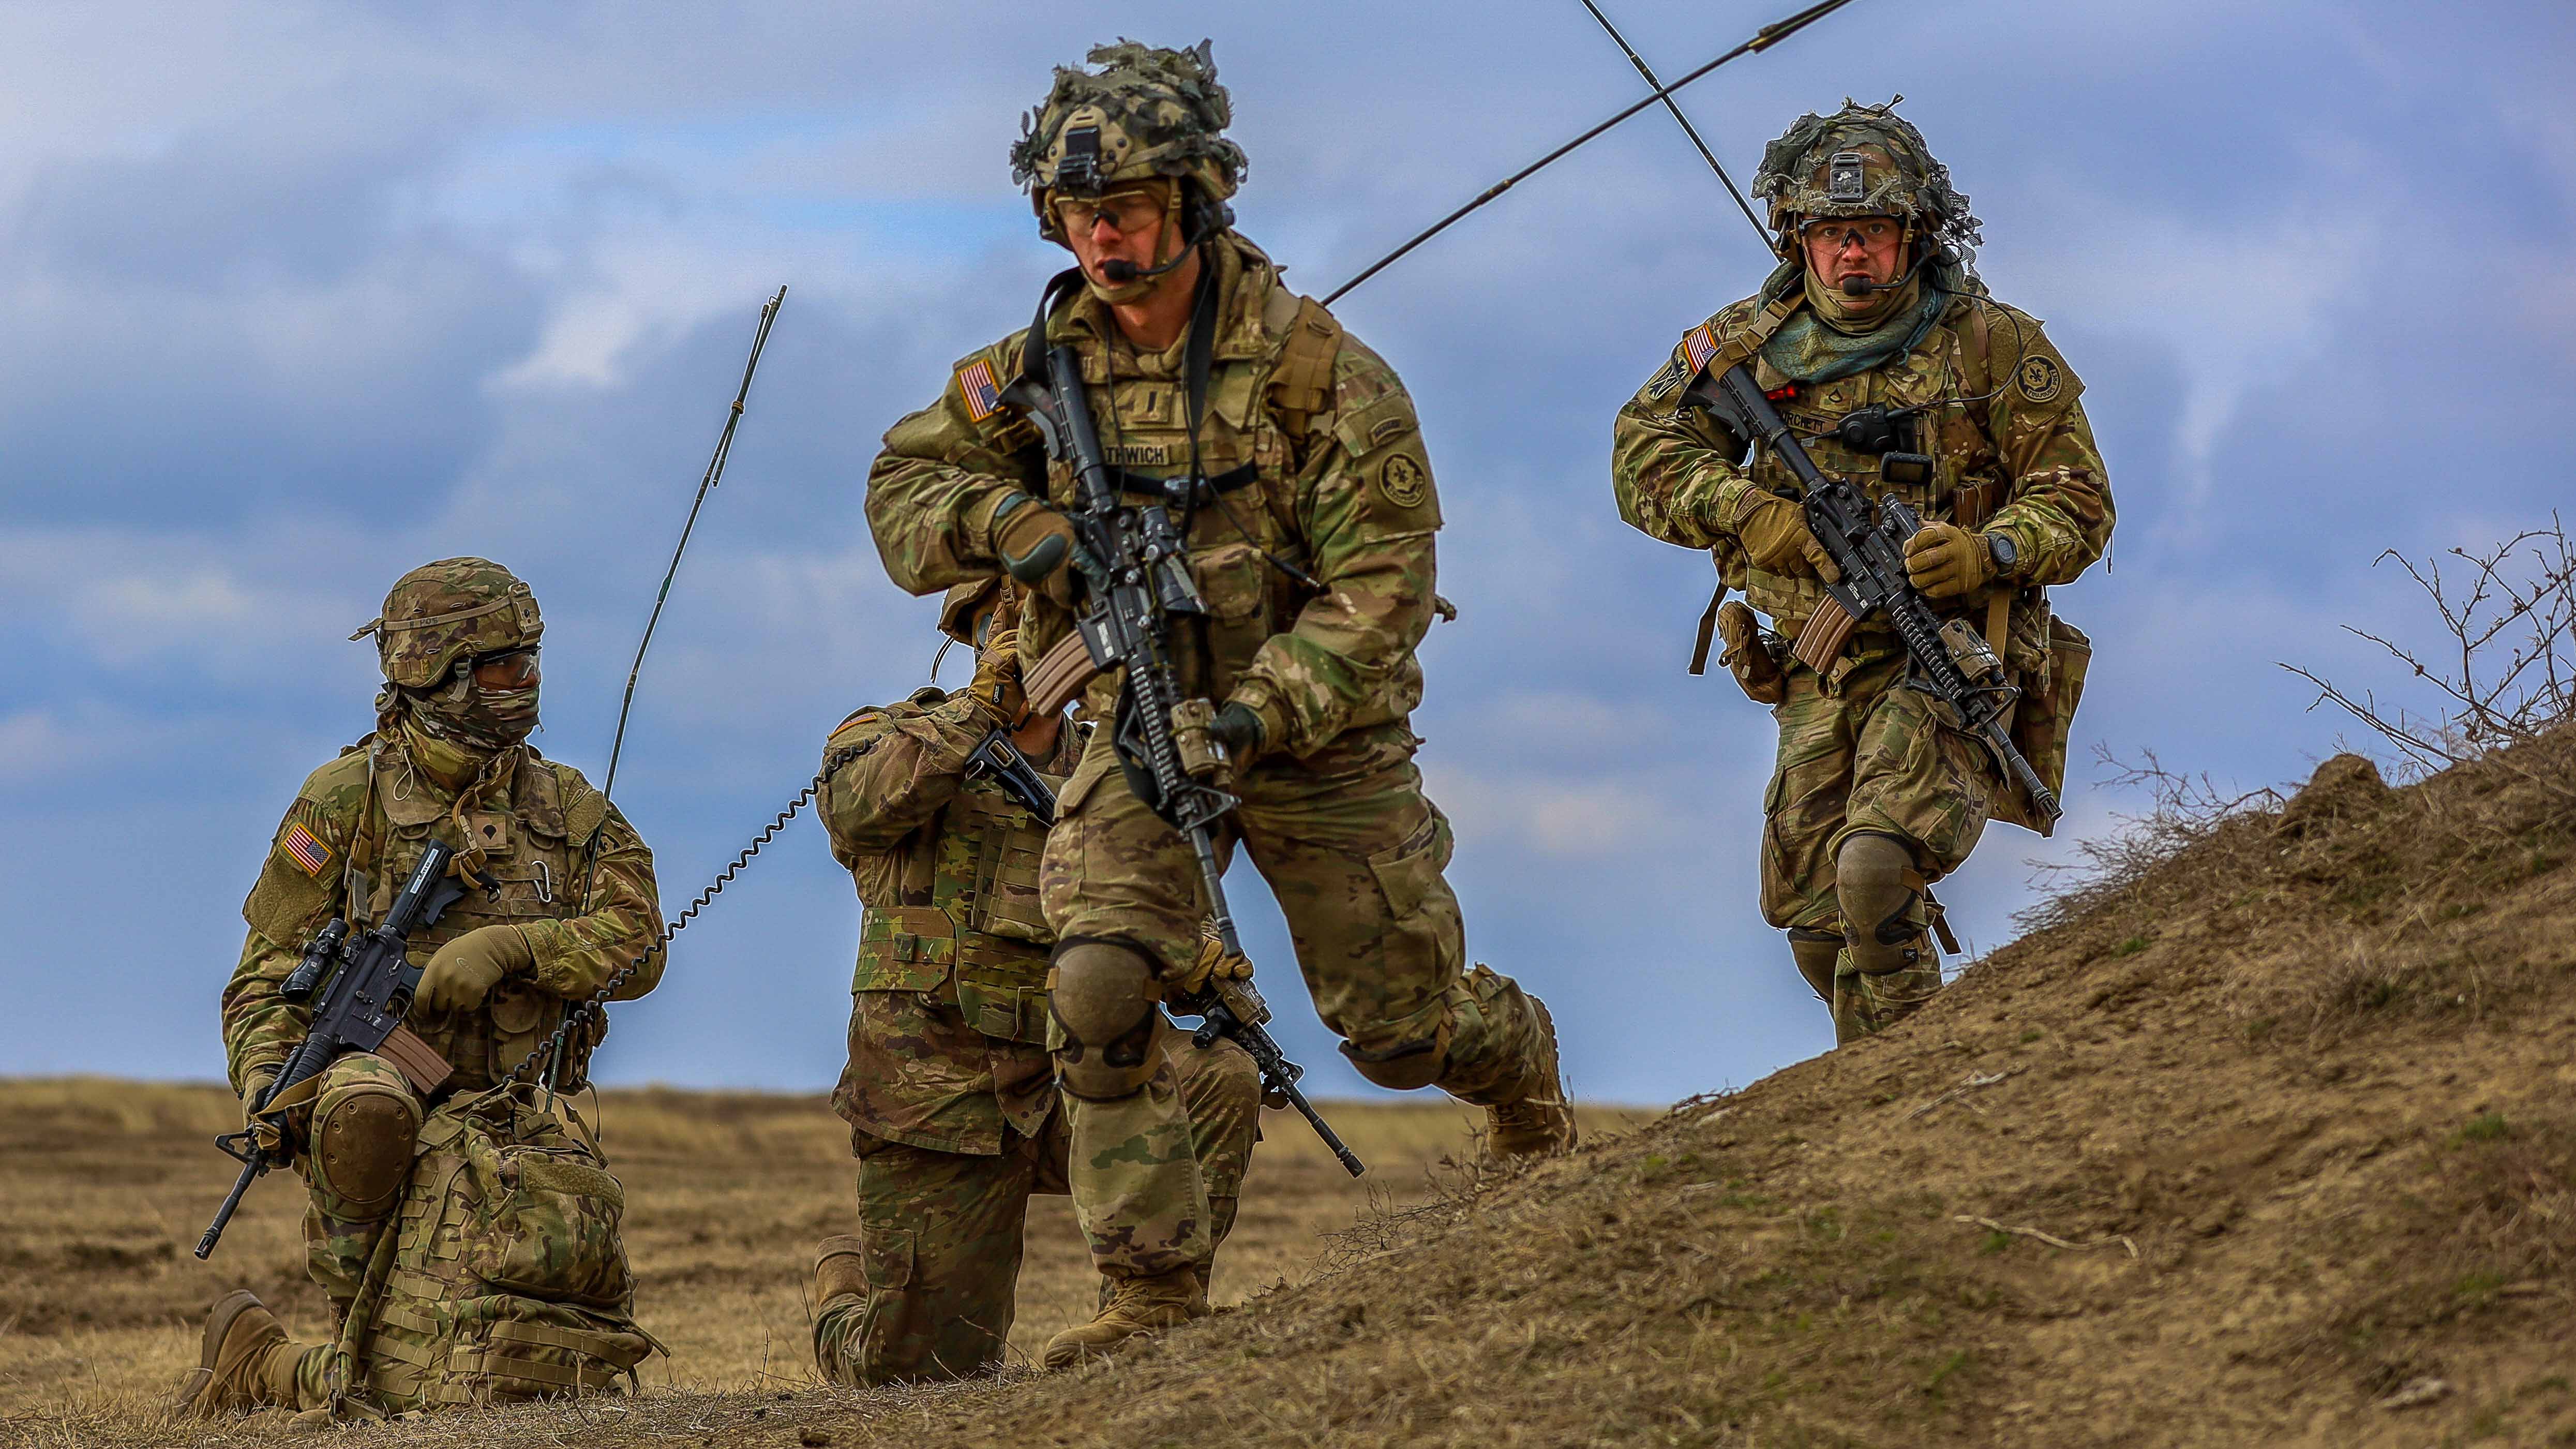 Soldiers move forward during training